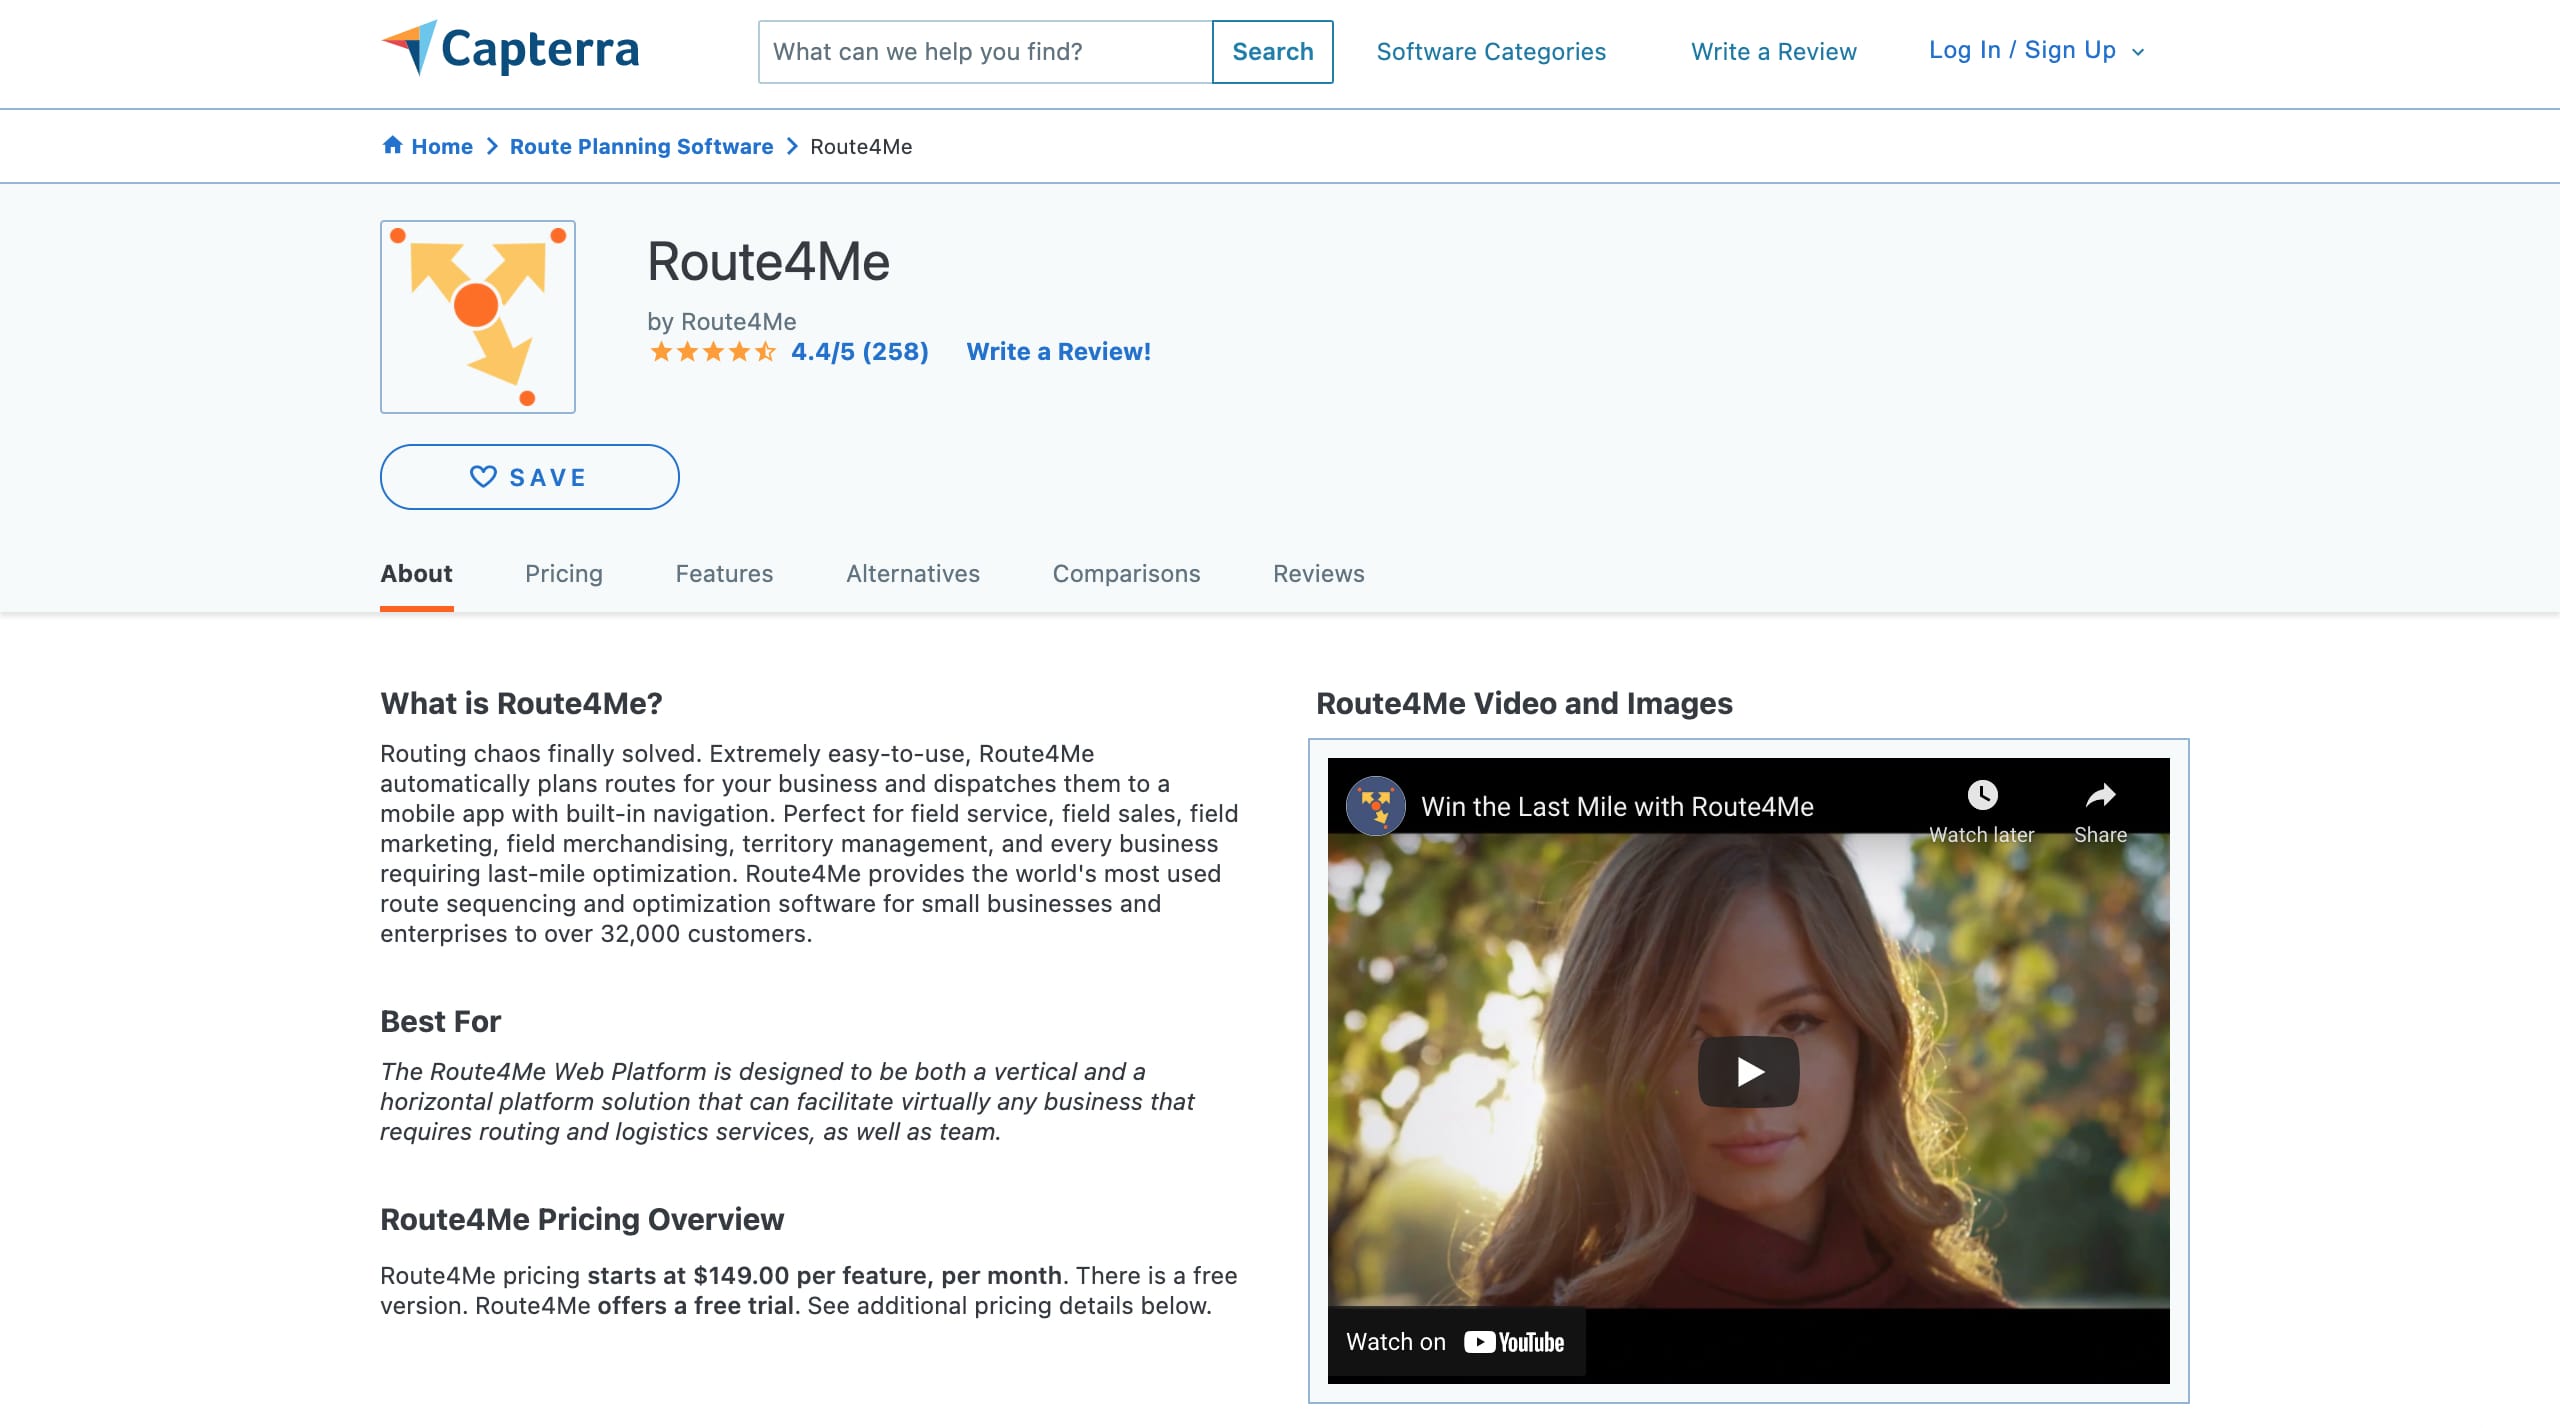 Route4Me's Business Profile on the Capterra Software Review Website